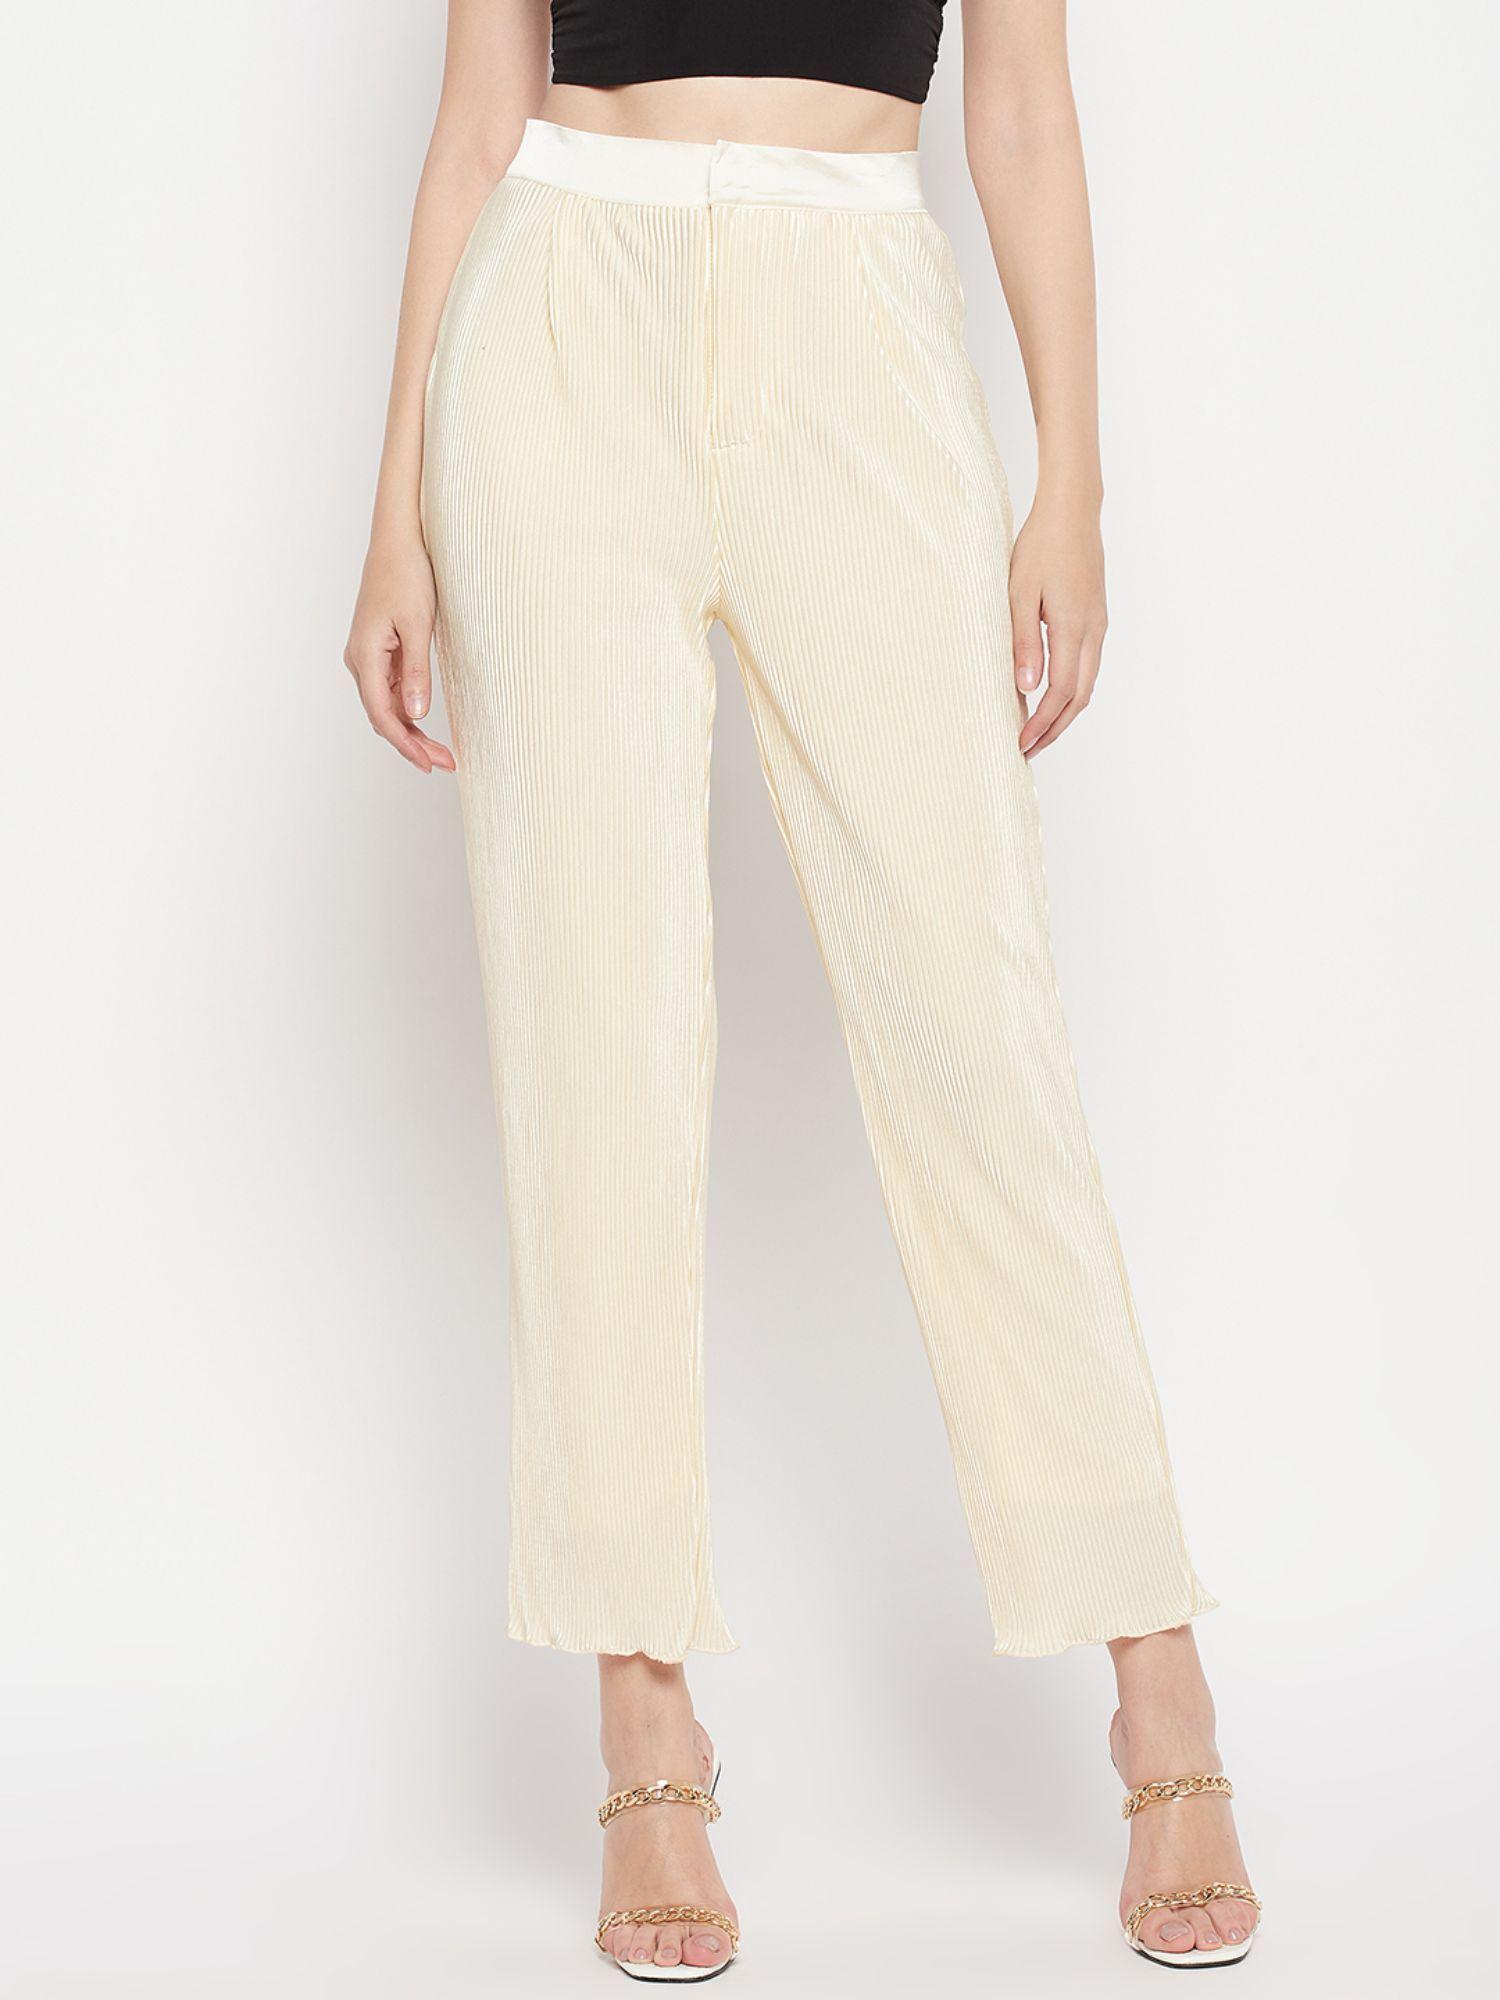 ribbed off white trousers